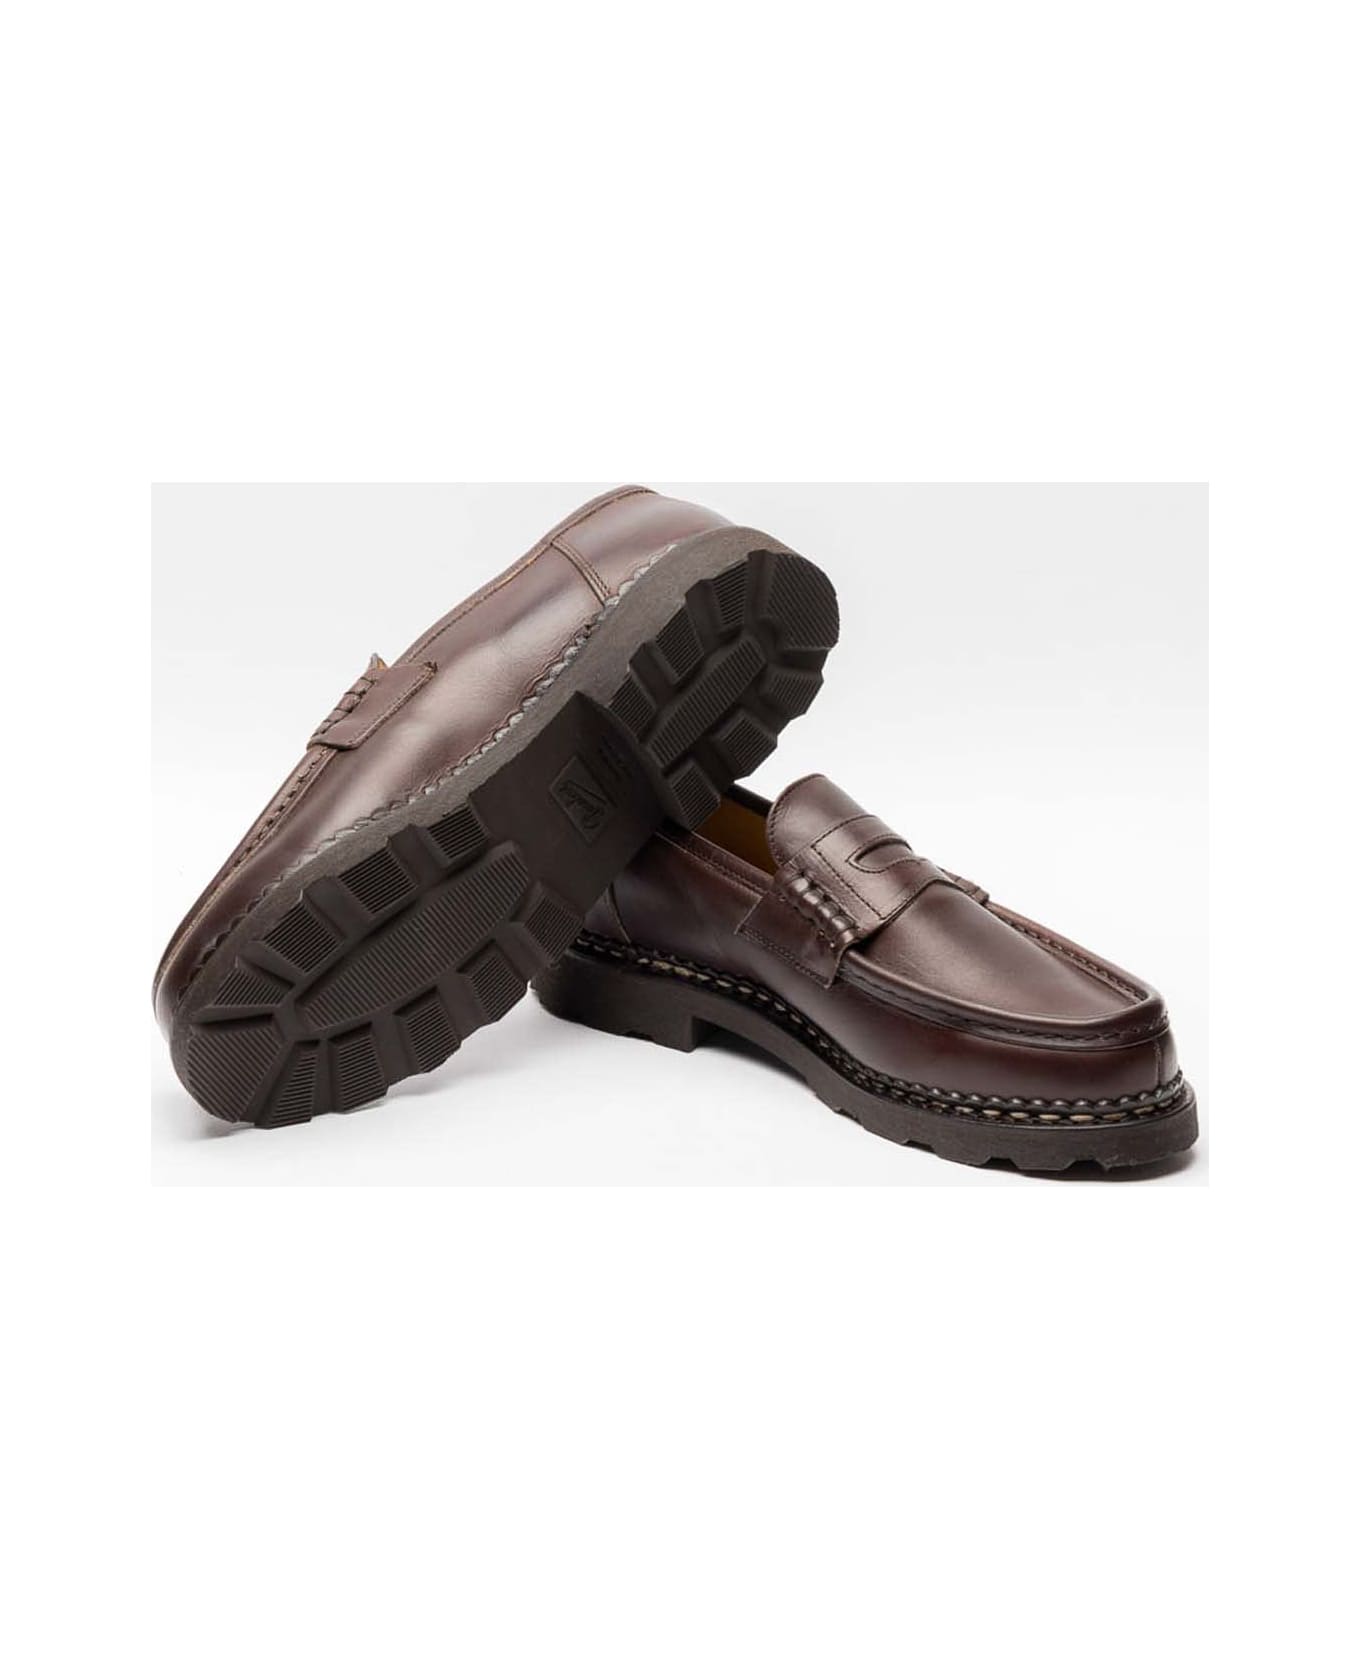 Paraboot Brown Calf Loafer - Marrone